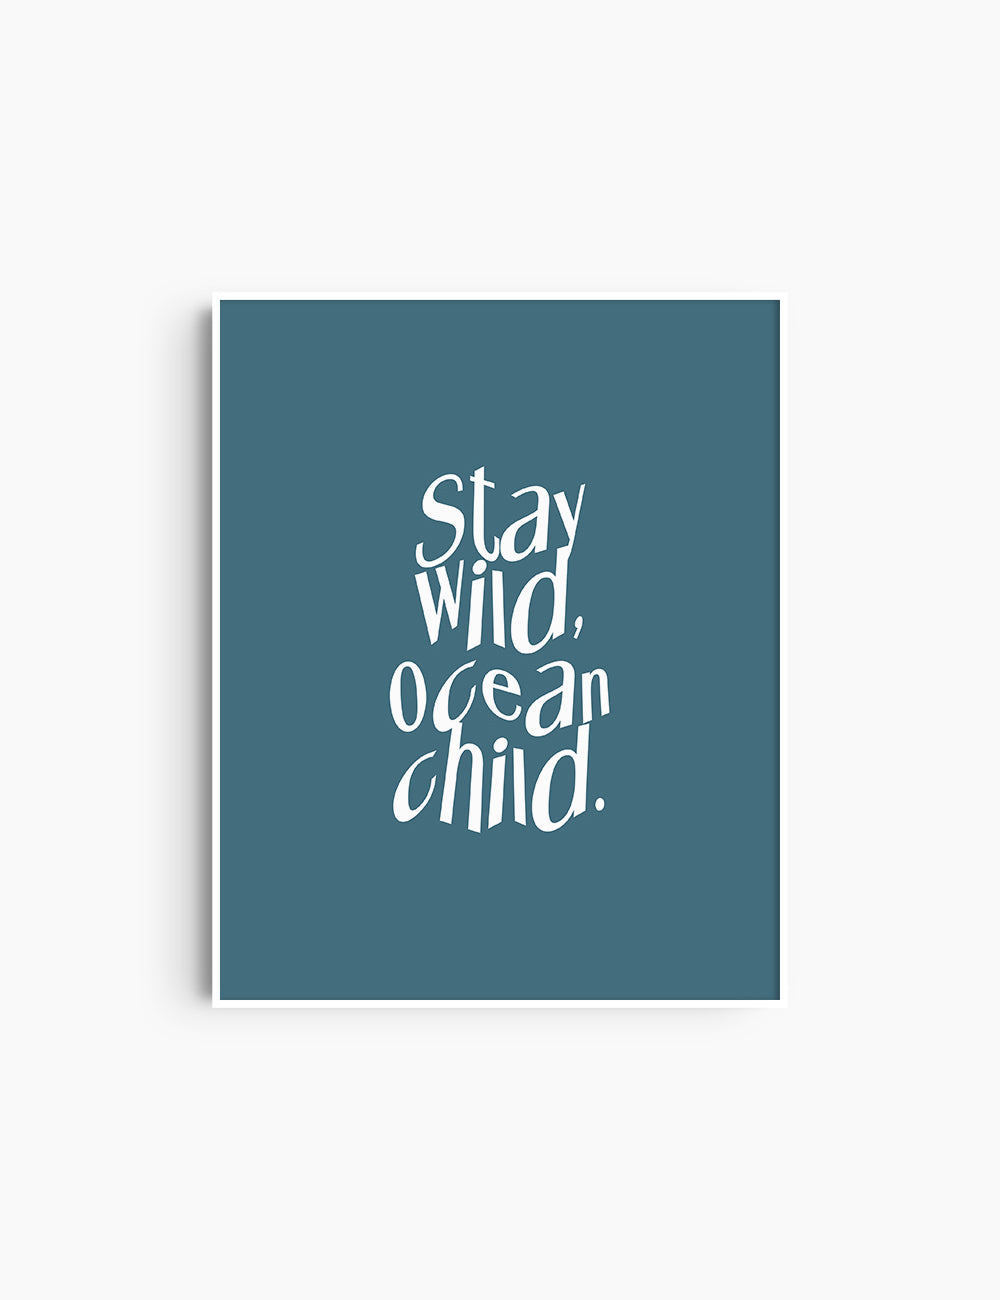 STAY WILD, OCEAN CHILD. Blue and White. Printable Wall Art Quote.